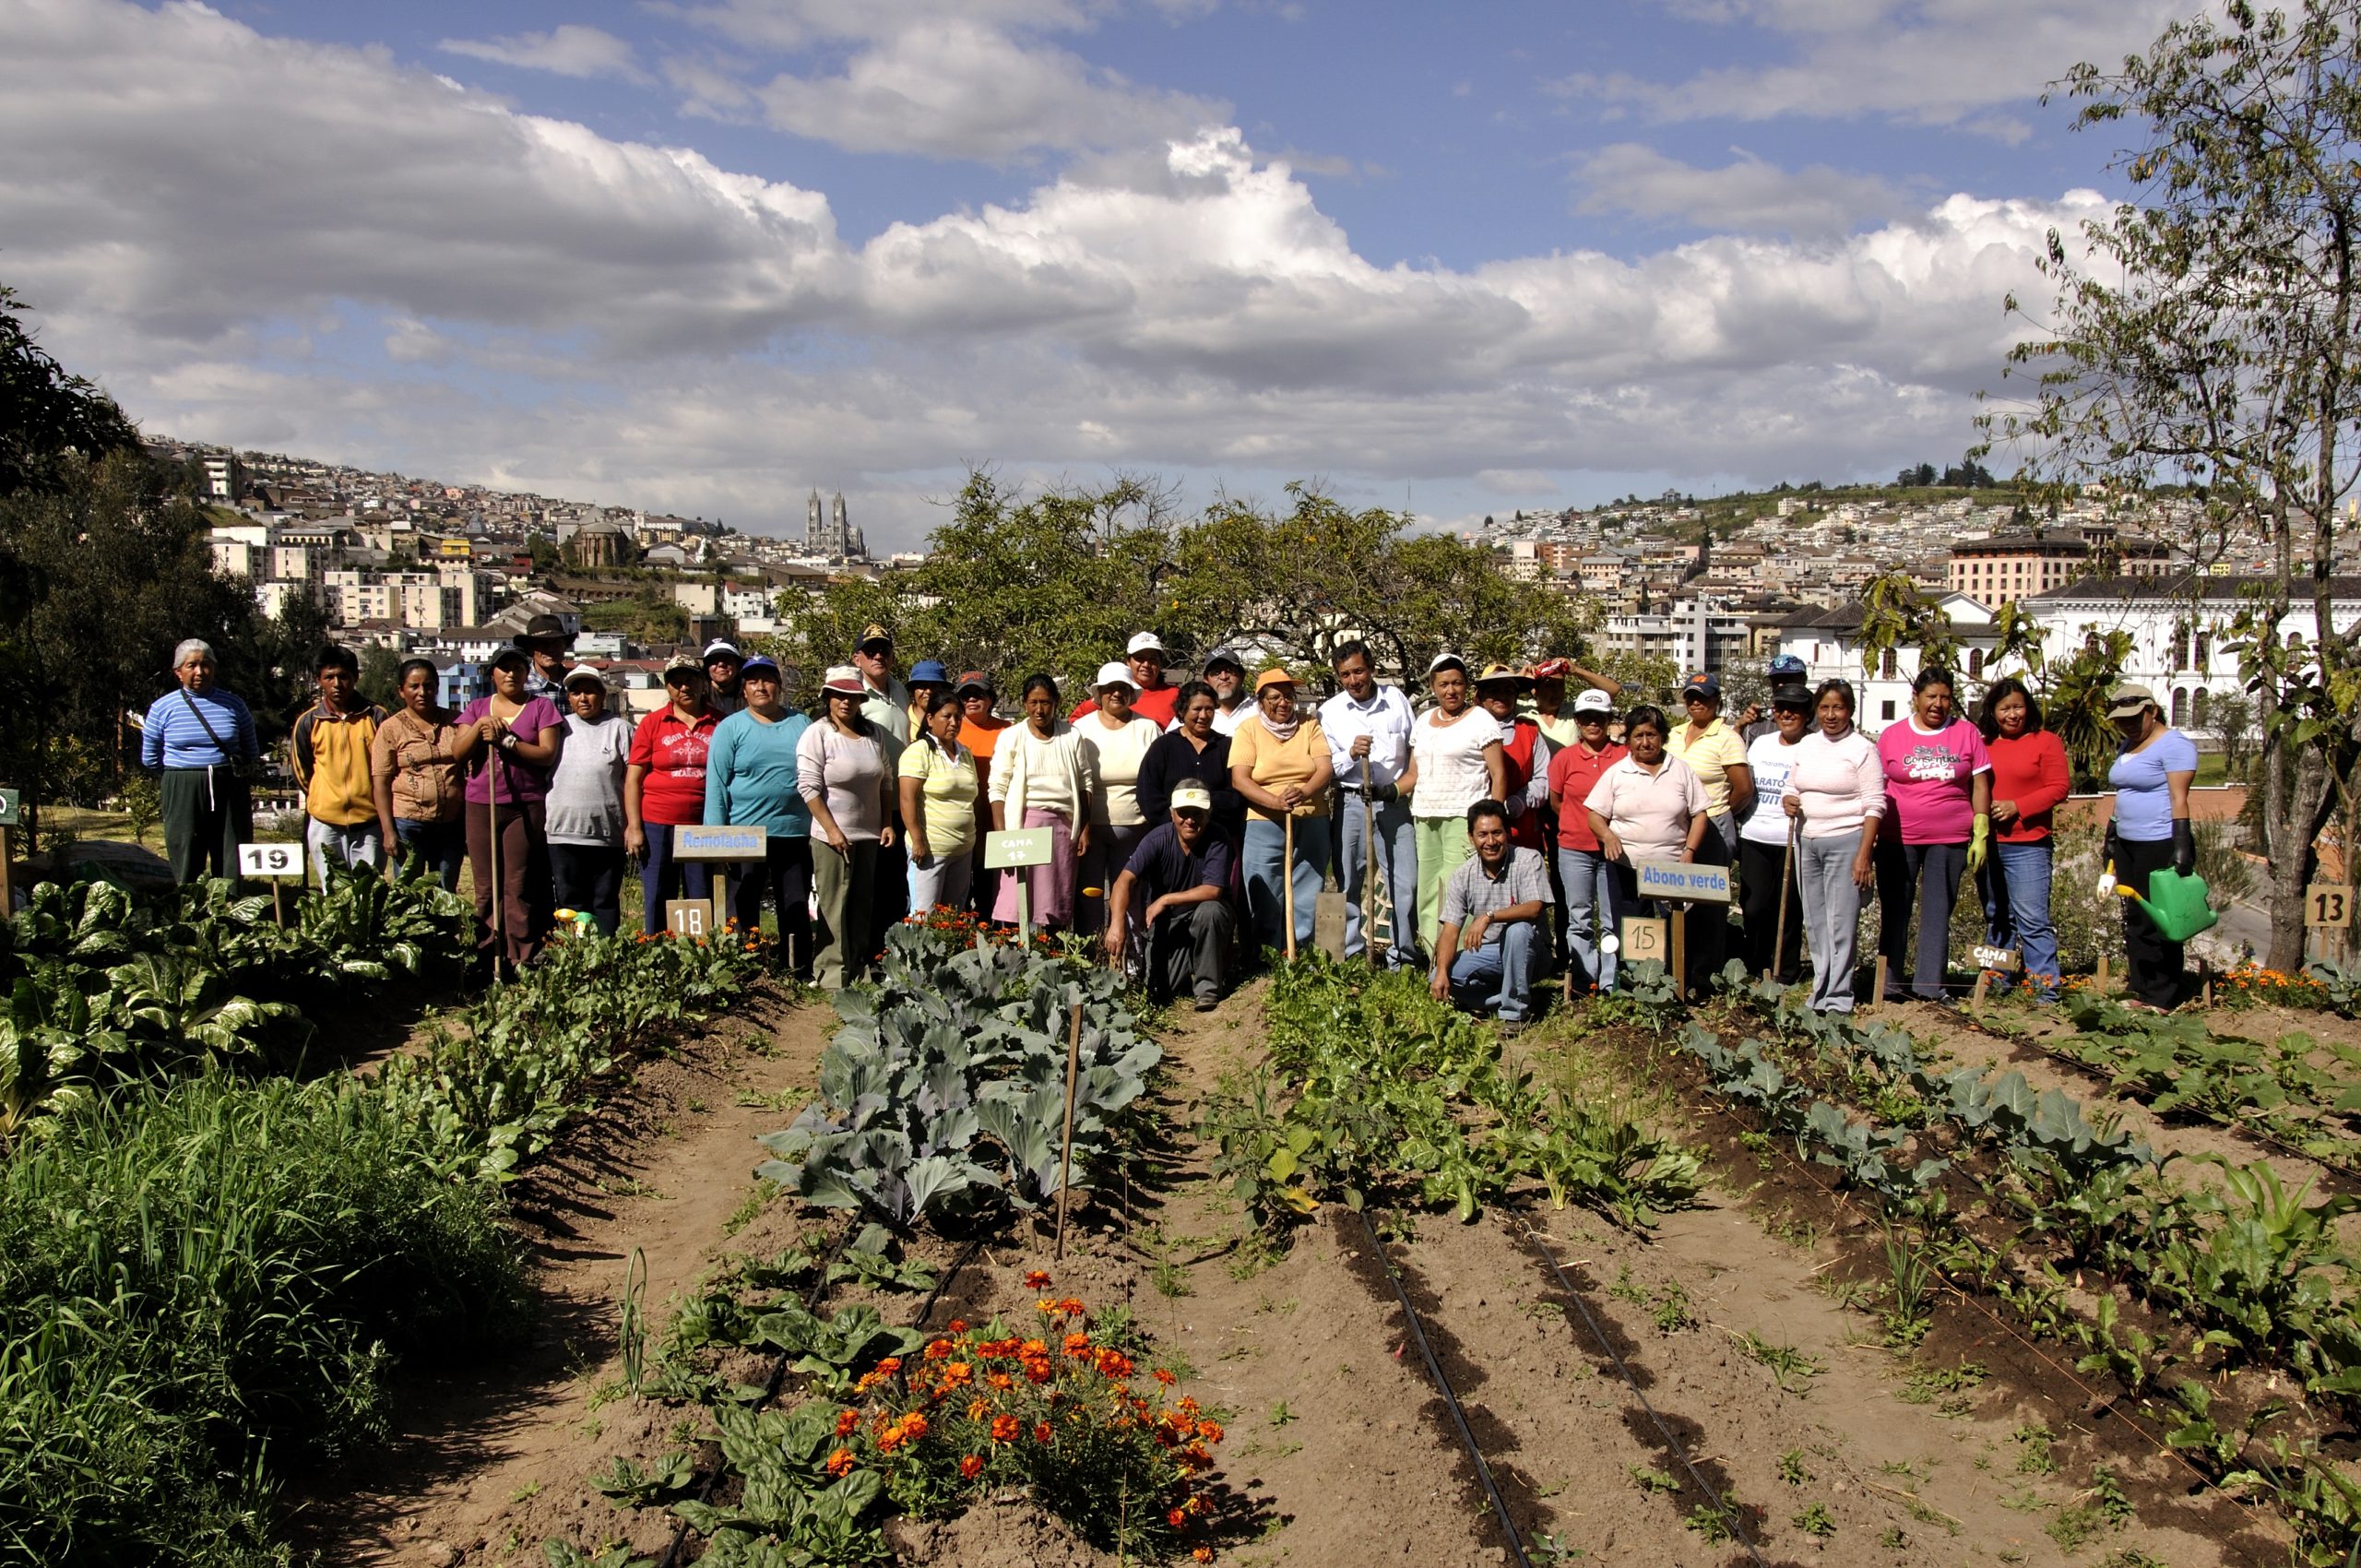 Quito’s journey to better food security